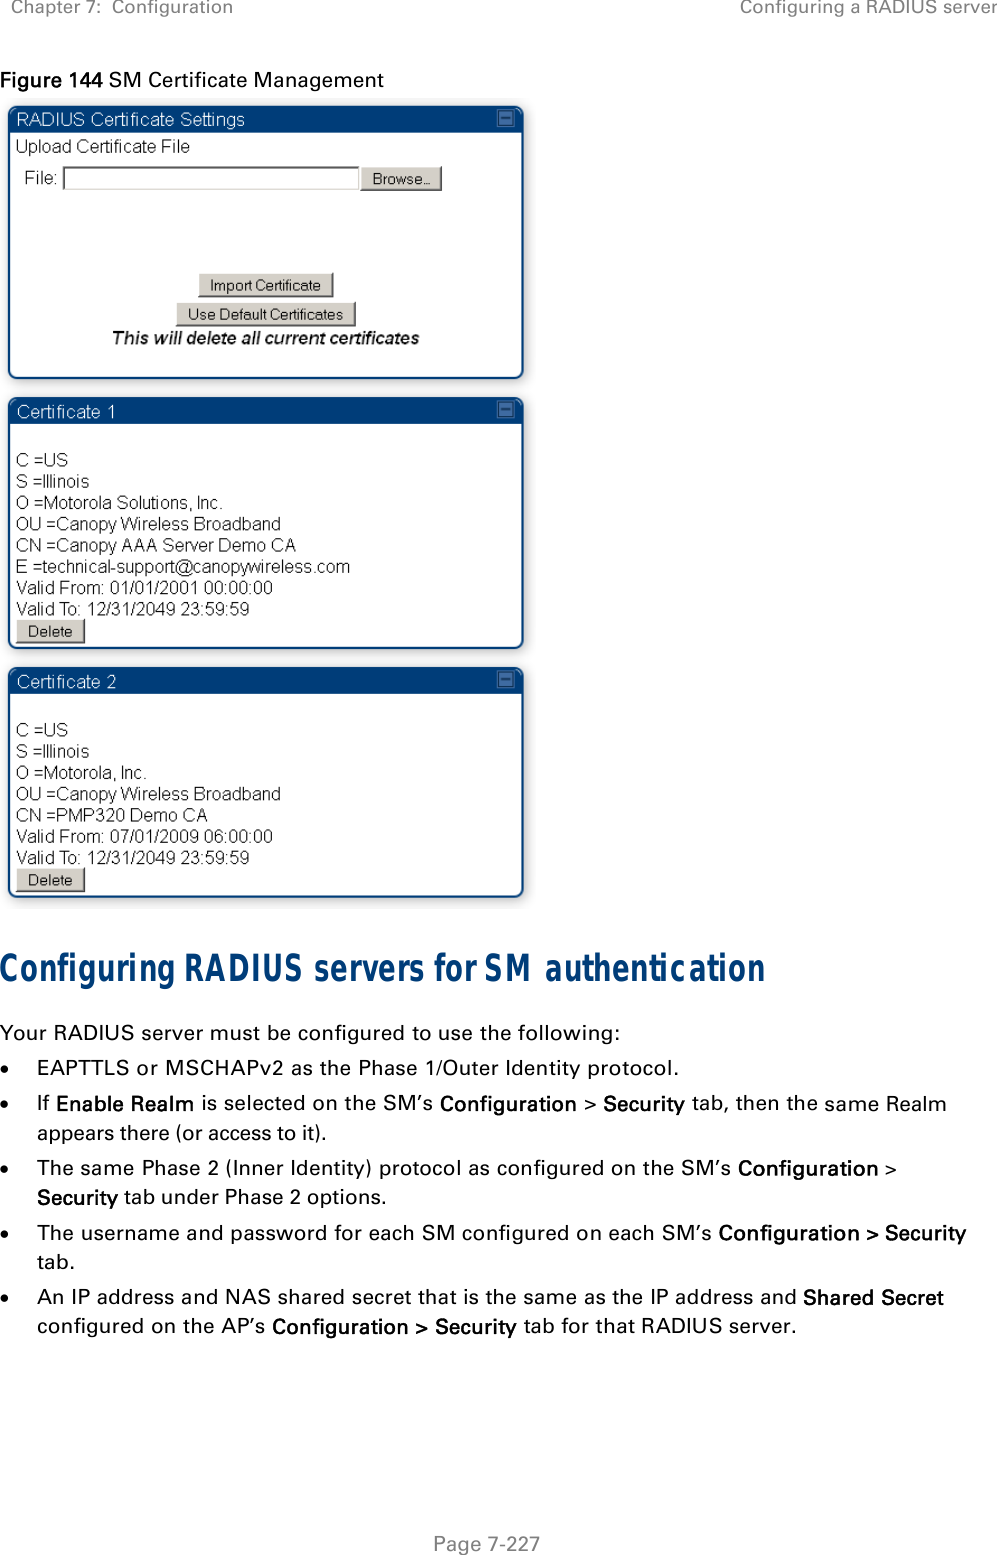 Chapter 7:  Configuration  Configuring a RADIUS server   Page 7-227 Figure 144 SM Certificate Management  Configuring RADIUS servers for SM authentication Your RADIUS server must be configured to use the following:  EAPTTLS or MSCHAPv2 as the Phase 1/Outer Identity protocol.  If Enable Realm is selected on the SM’s Configuration &gt; Security tab, then the same Realm appears there (or access to it).  The same Phase 2 (Inner Identity) protocol as configured on the SM’s Configuration &gt; Security tab under Phase 2 options.  The username and password for each SM configured on each SM’s Configuration &gt; Security tab.  An IP address and NAS shared secret that is the same as the IP address and Shared Secret configured on the AP’s Configuration &gt; Security tab for that RADIUS server. 